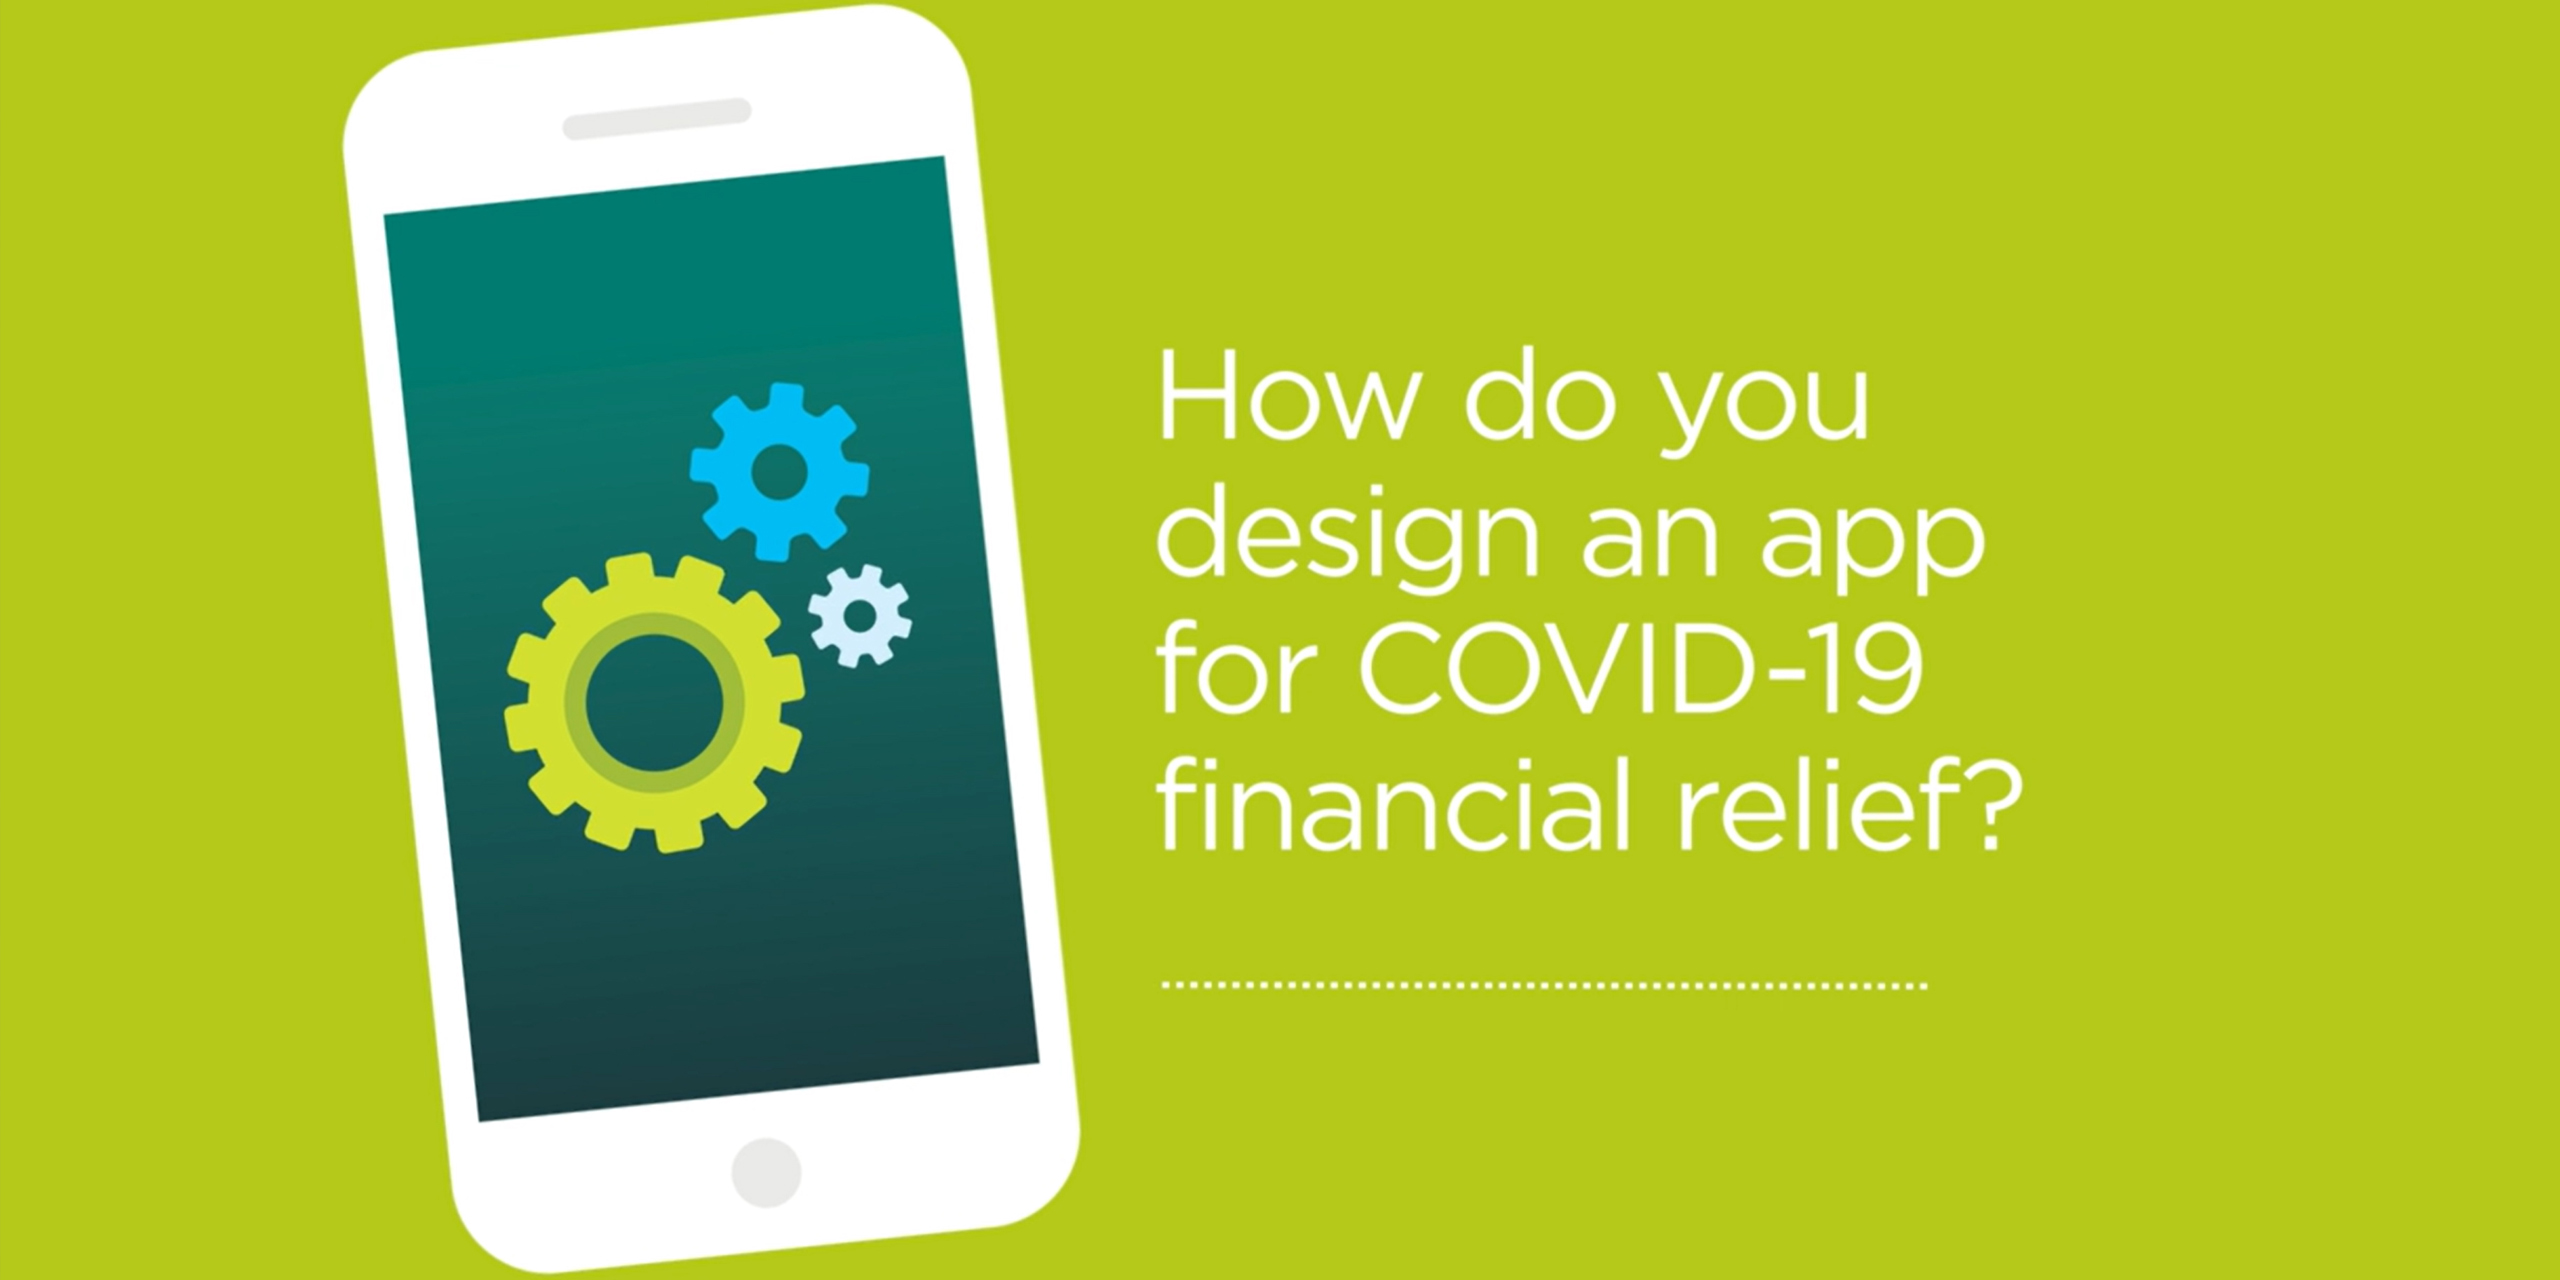 A graphic showing an illustration of a smartphone with gears on its screen. Besides the phone is the text "How do you design an app for COVID-19 financial relief?"